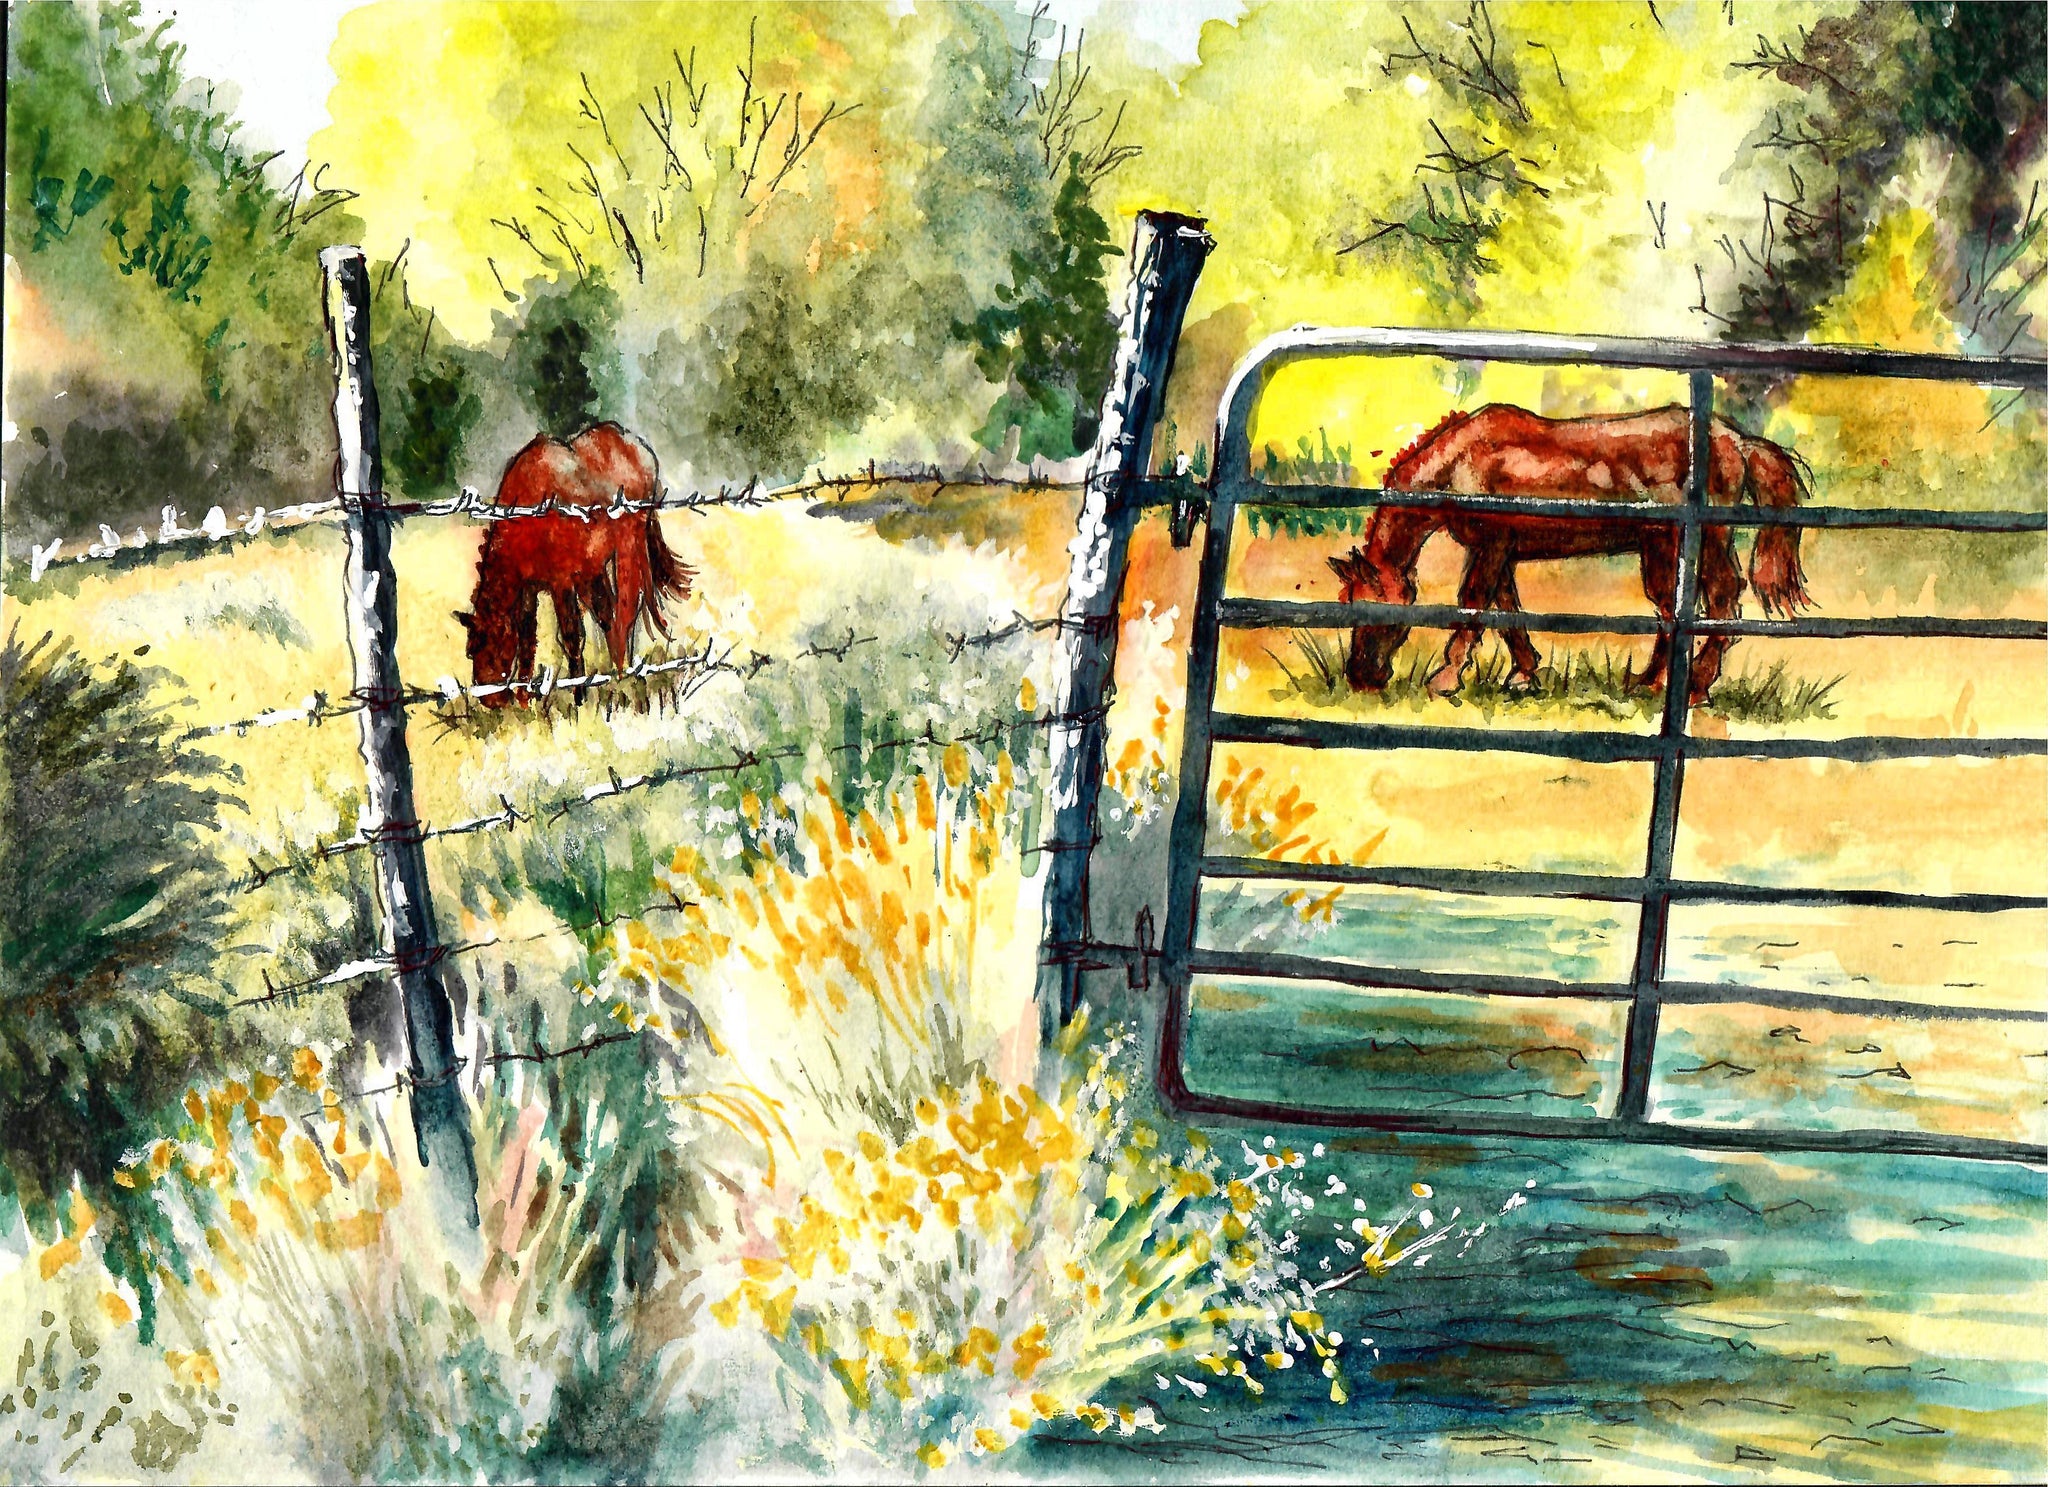 Nature - Horses Grazing In A Pasture, Horse Art, Country Art, Horse Farm, Country Art